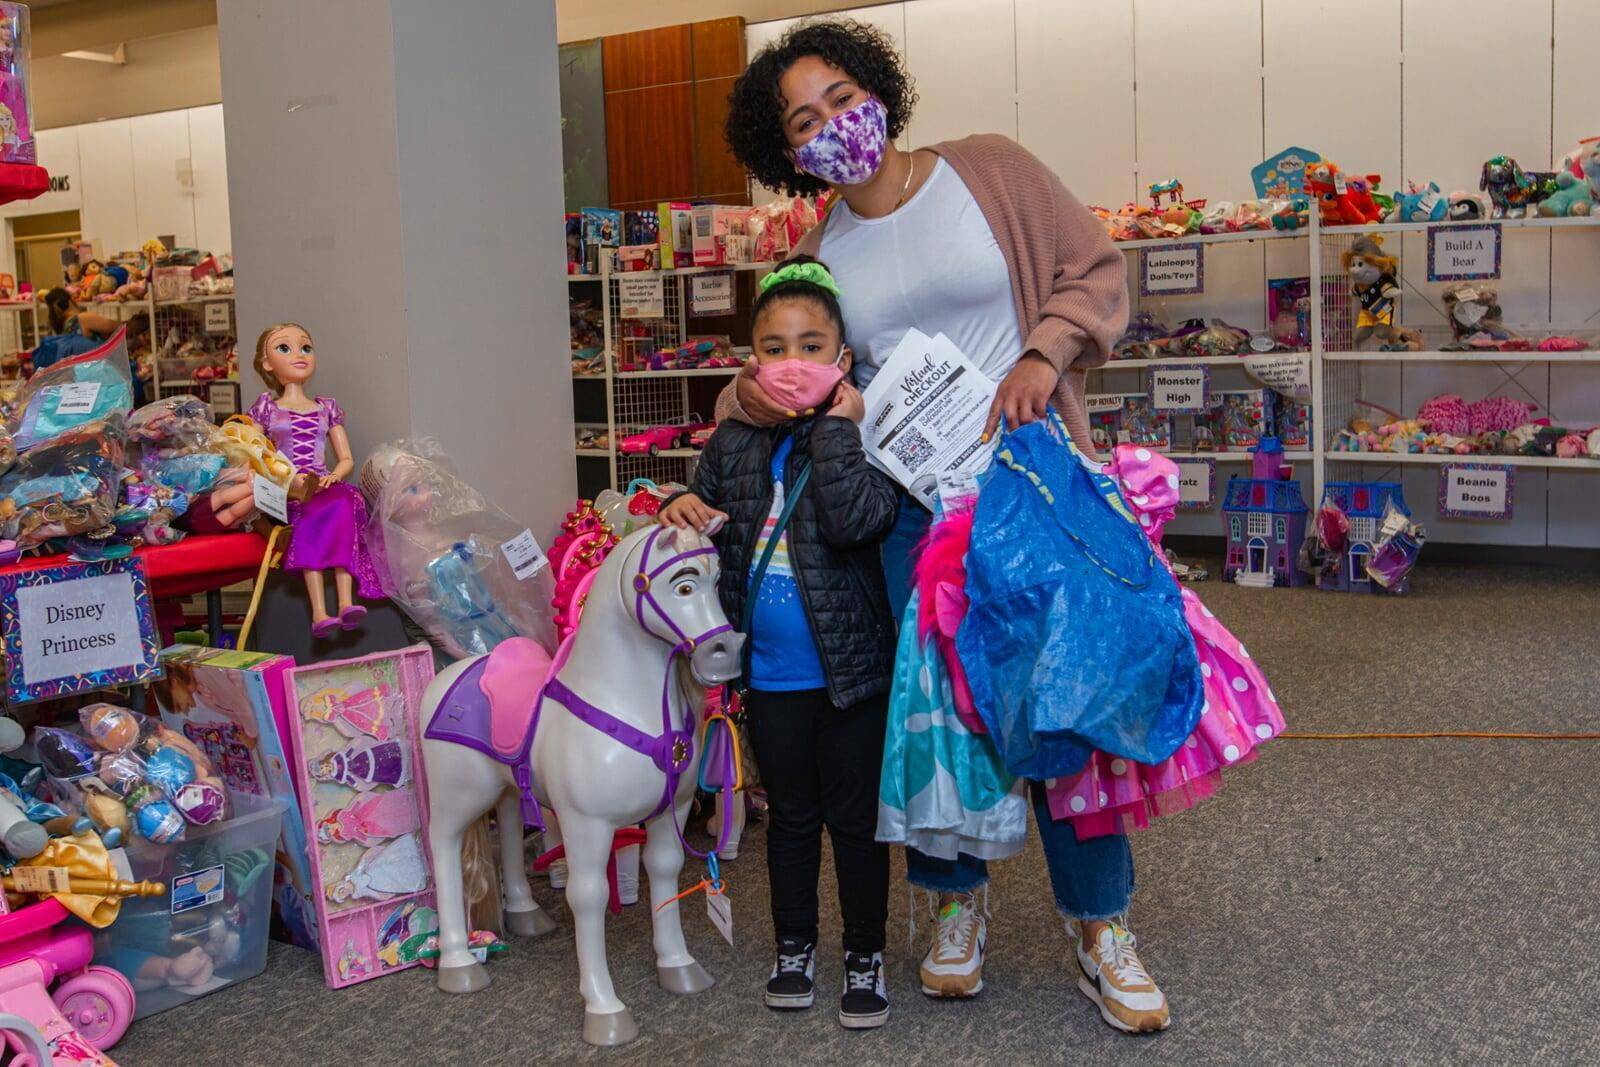 A mom standing with her arm around her daughter & the daughter's hand is on a toy horse.  Mom is holding a JBF shopping bag and clothing.